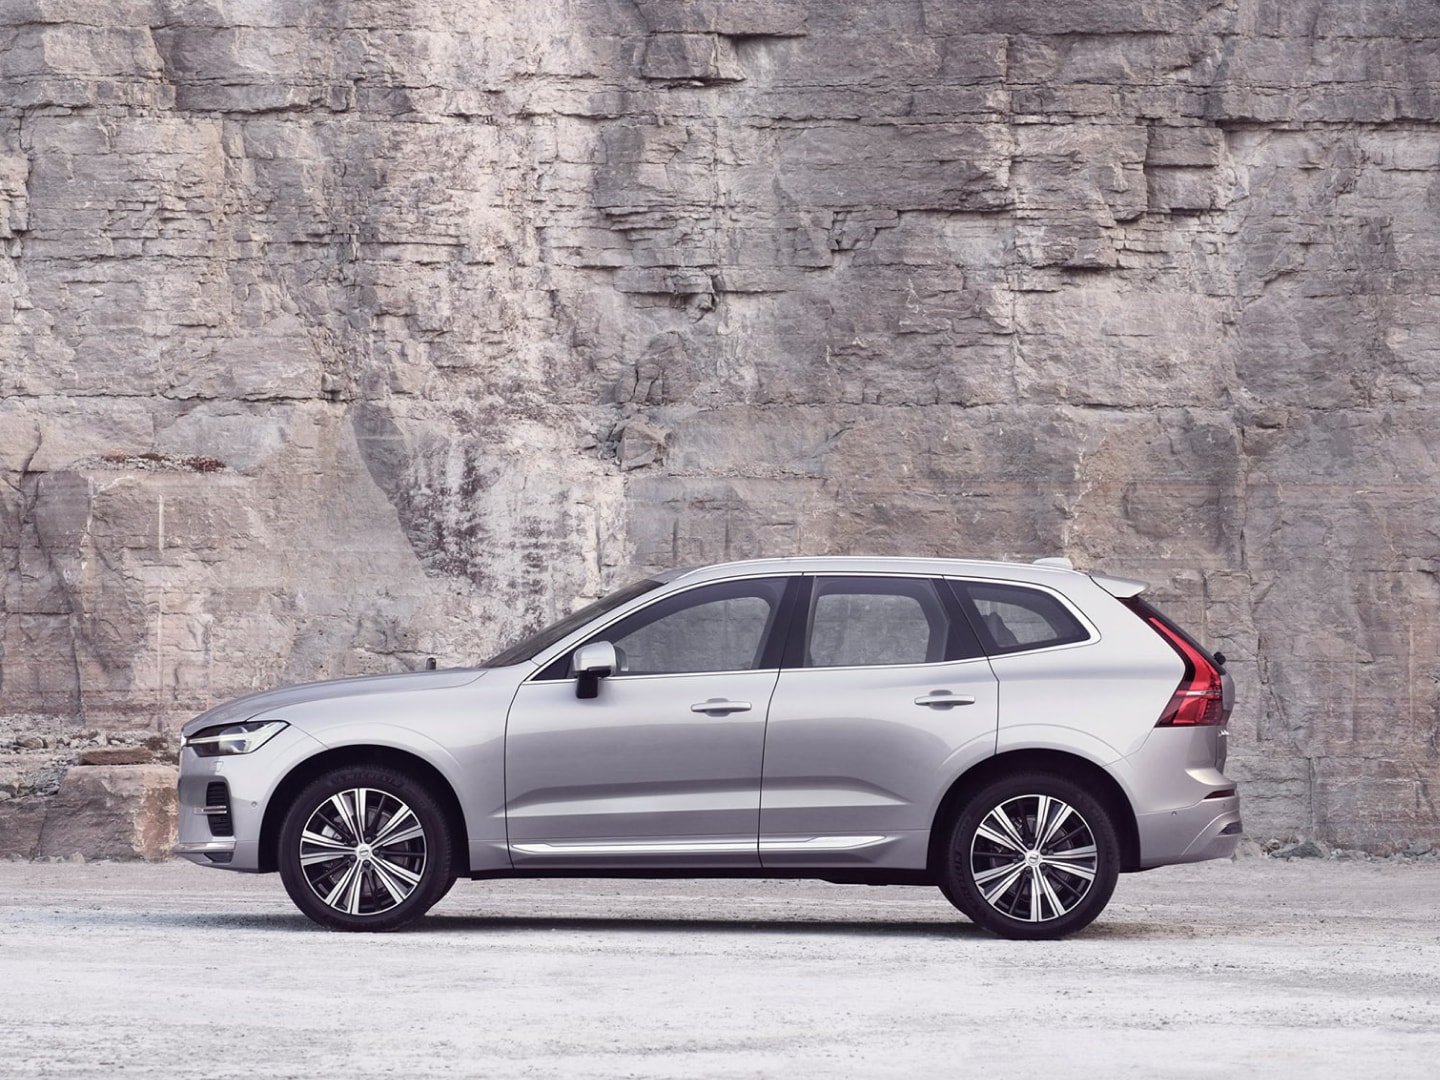 A silver Volvo XC60 standing still in front of a rock wall.